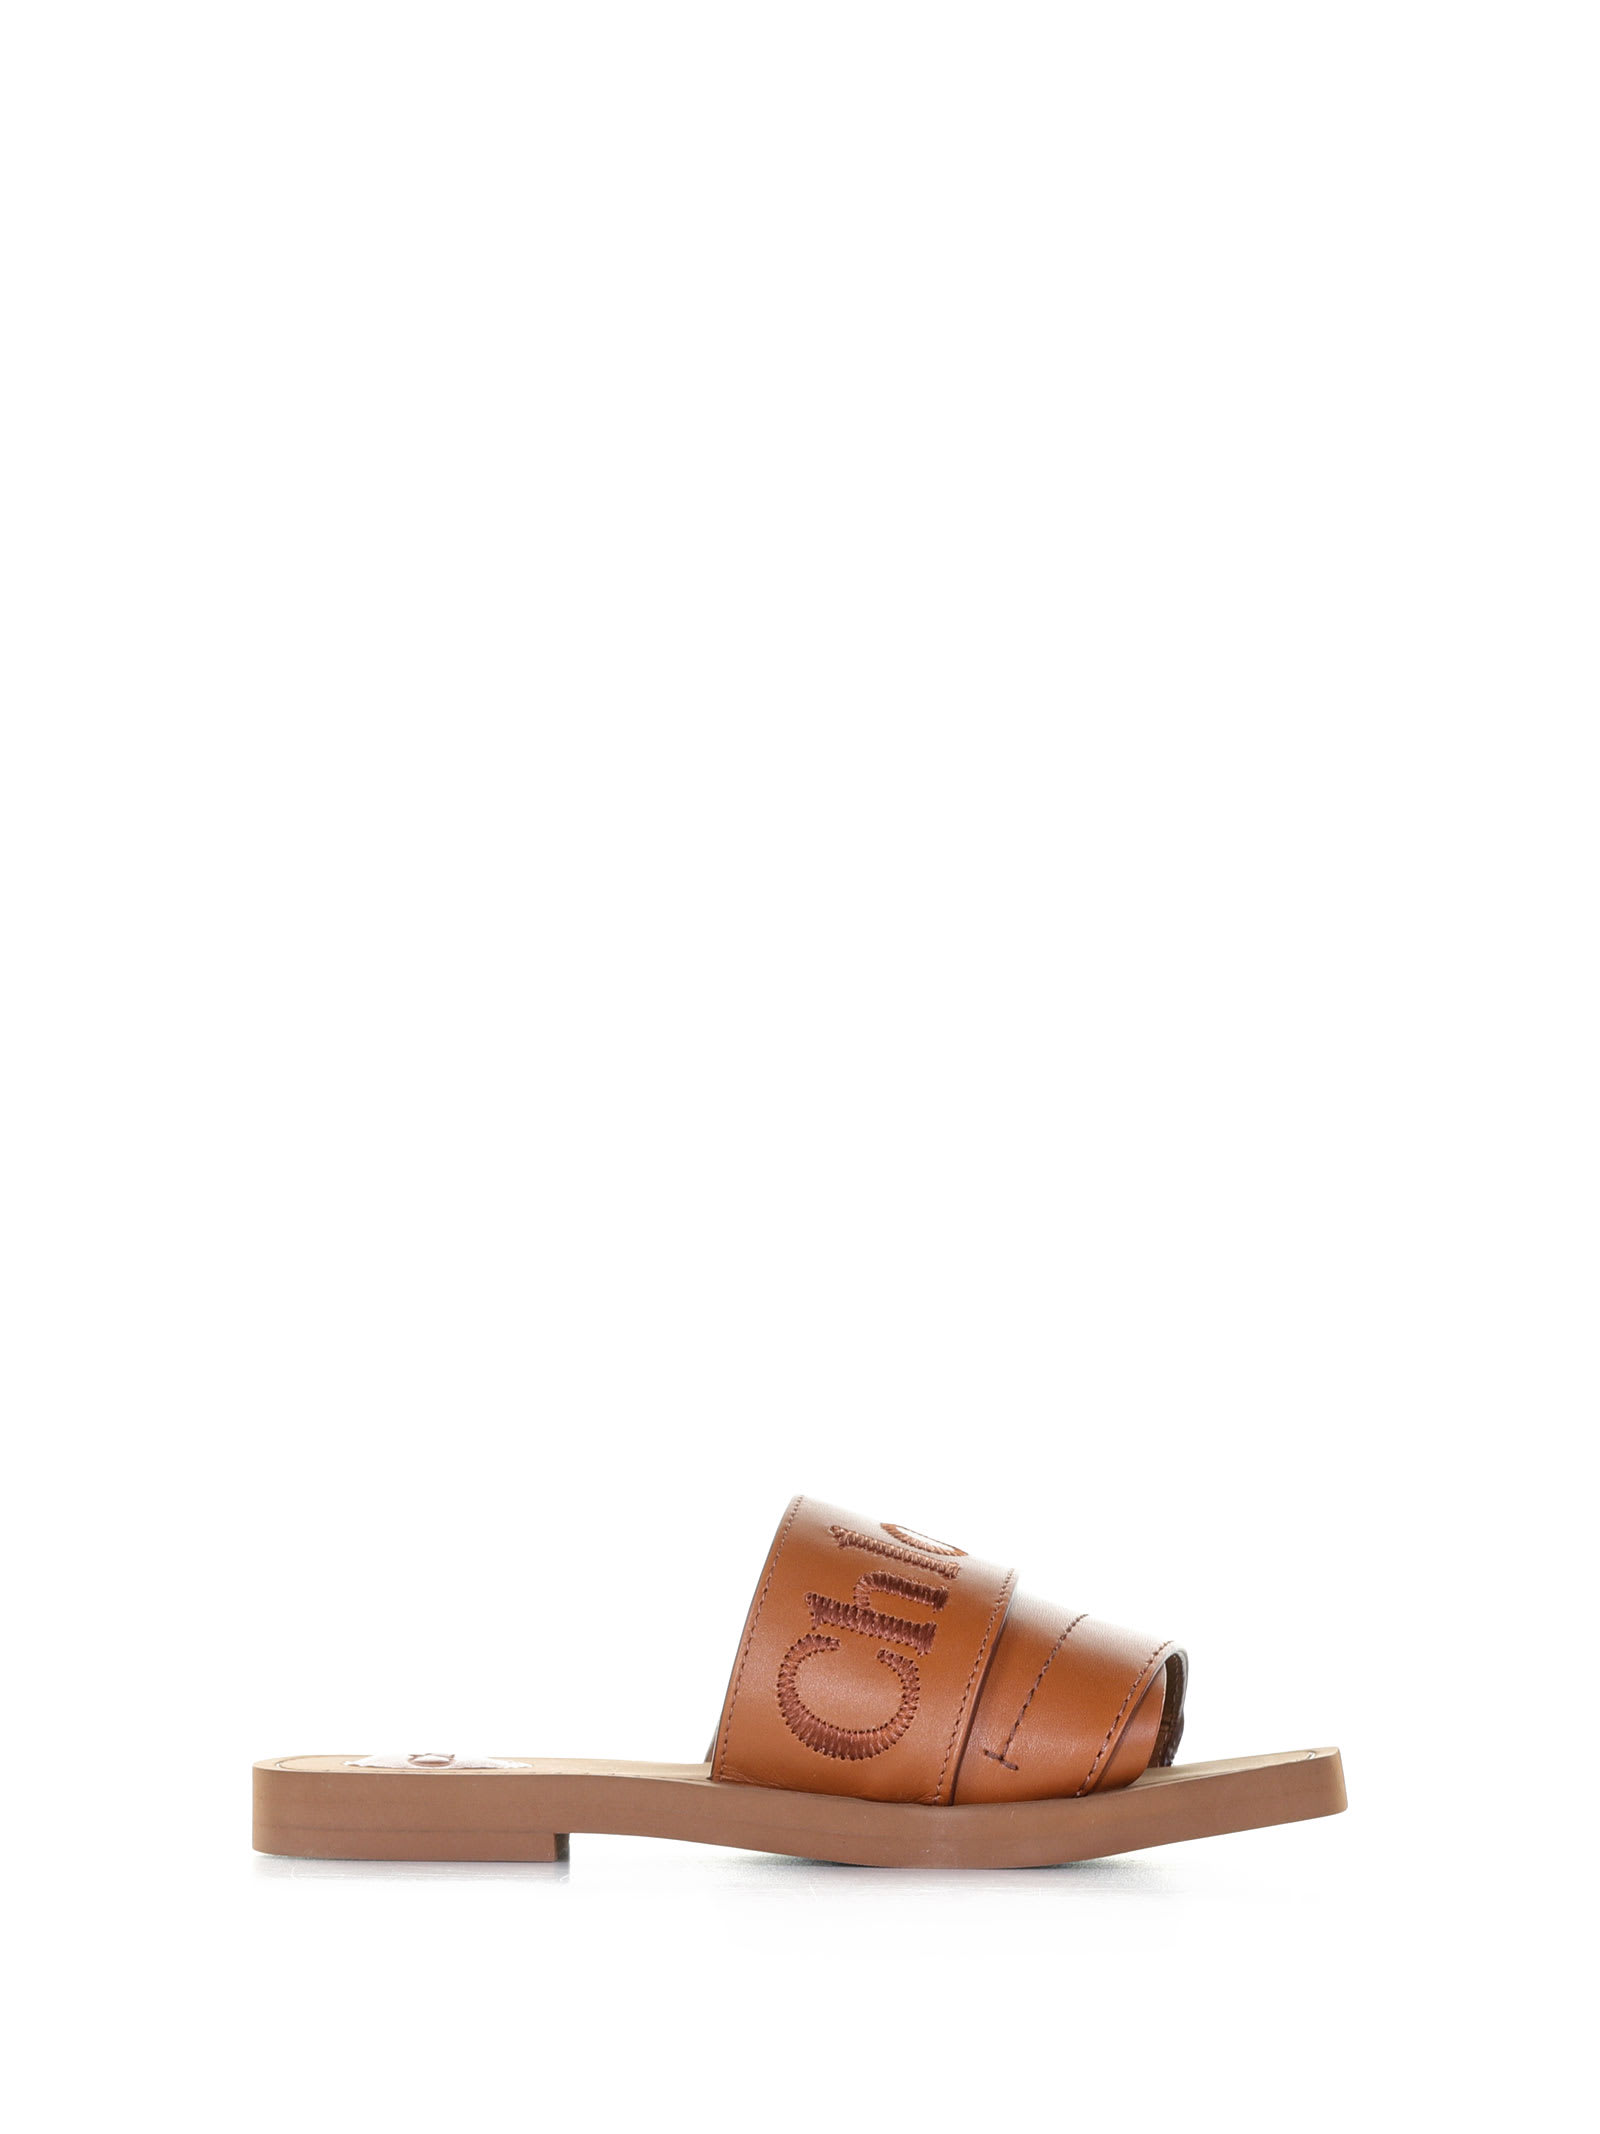 Chloé Woody Slide Sandal In Smooth Leather